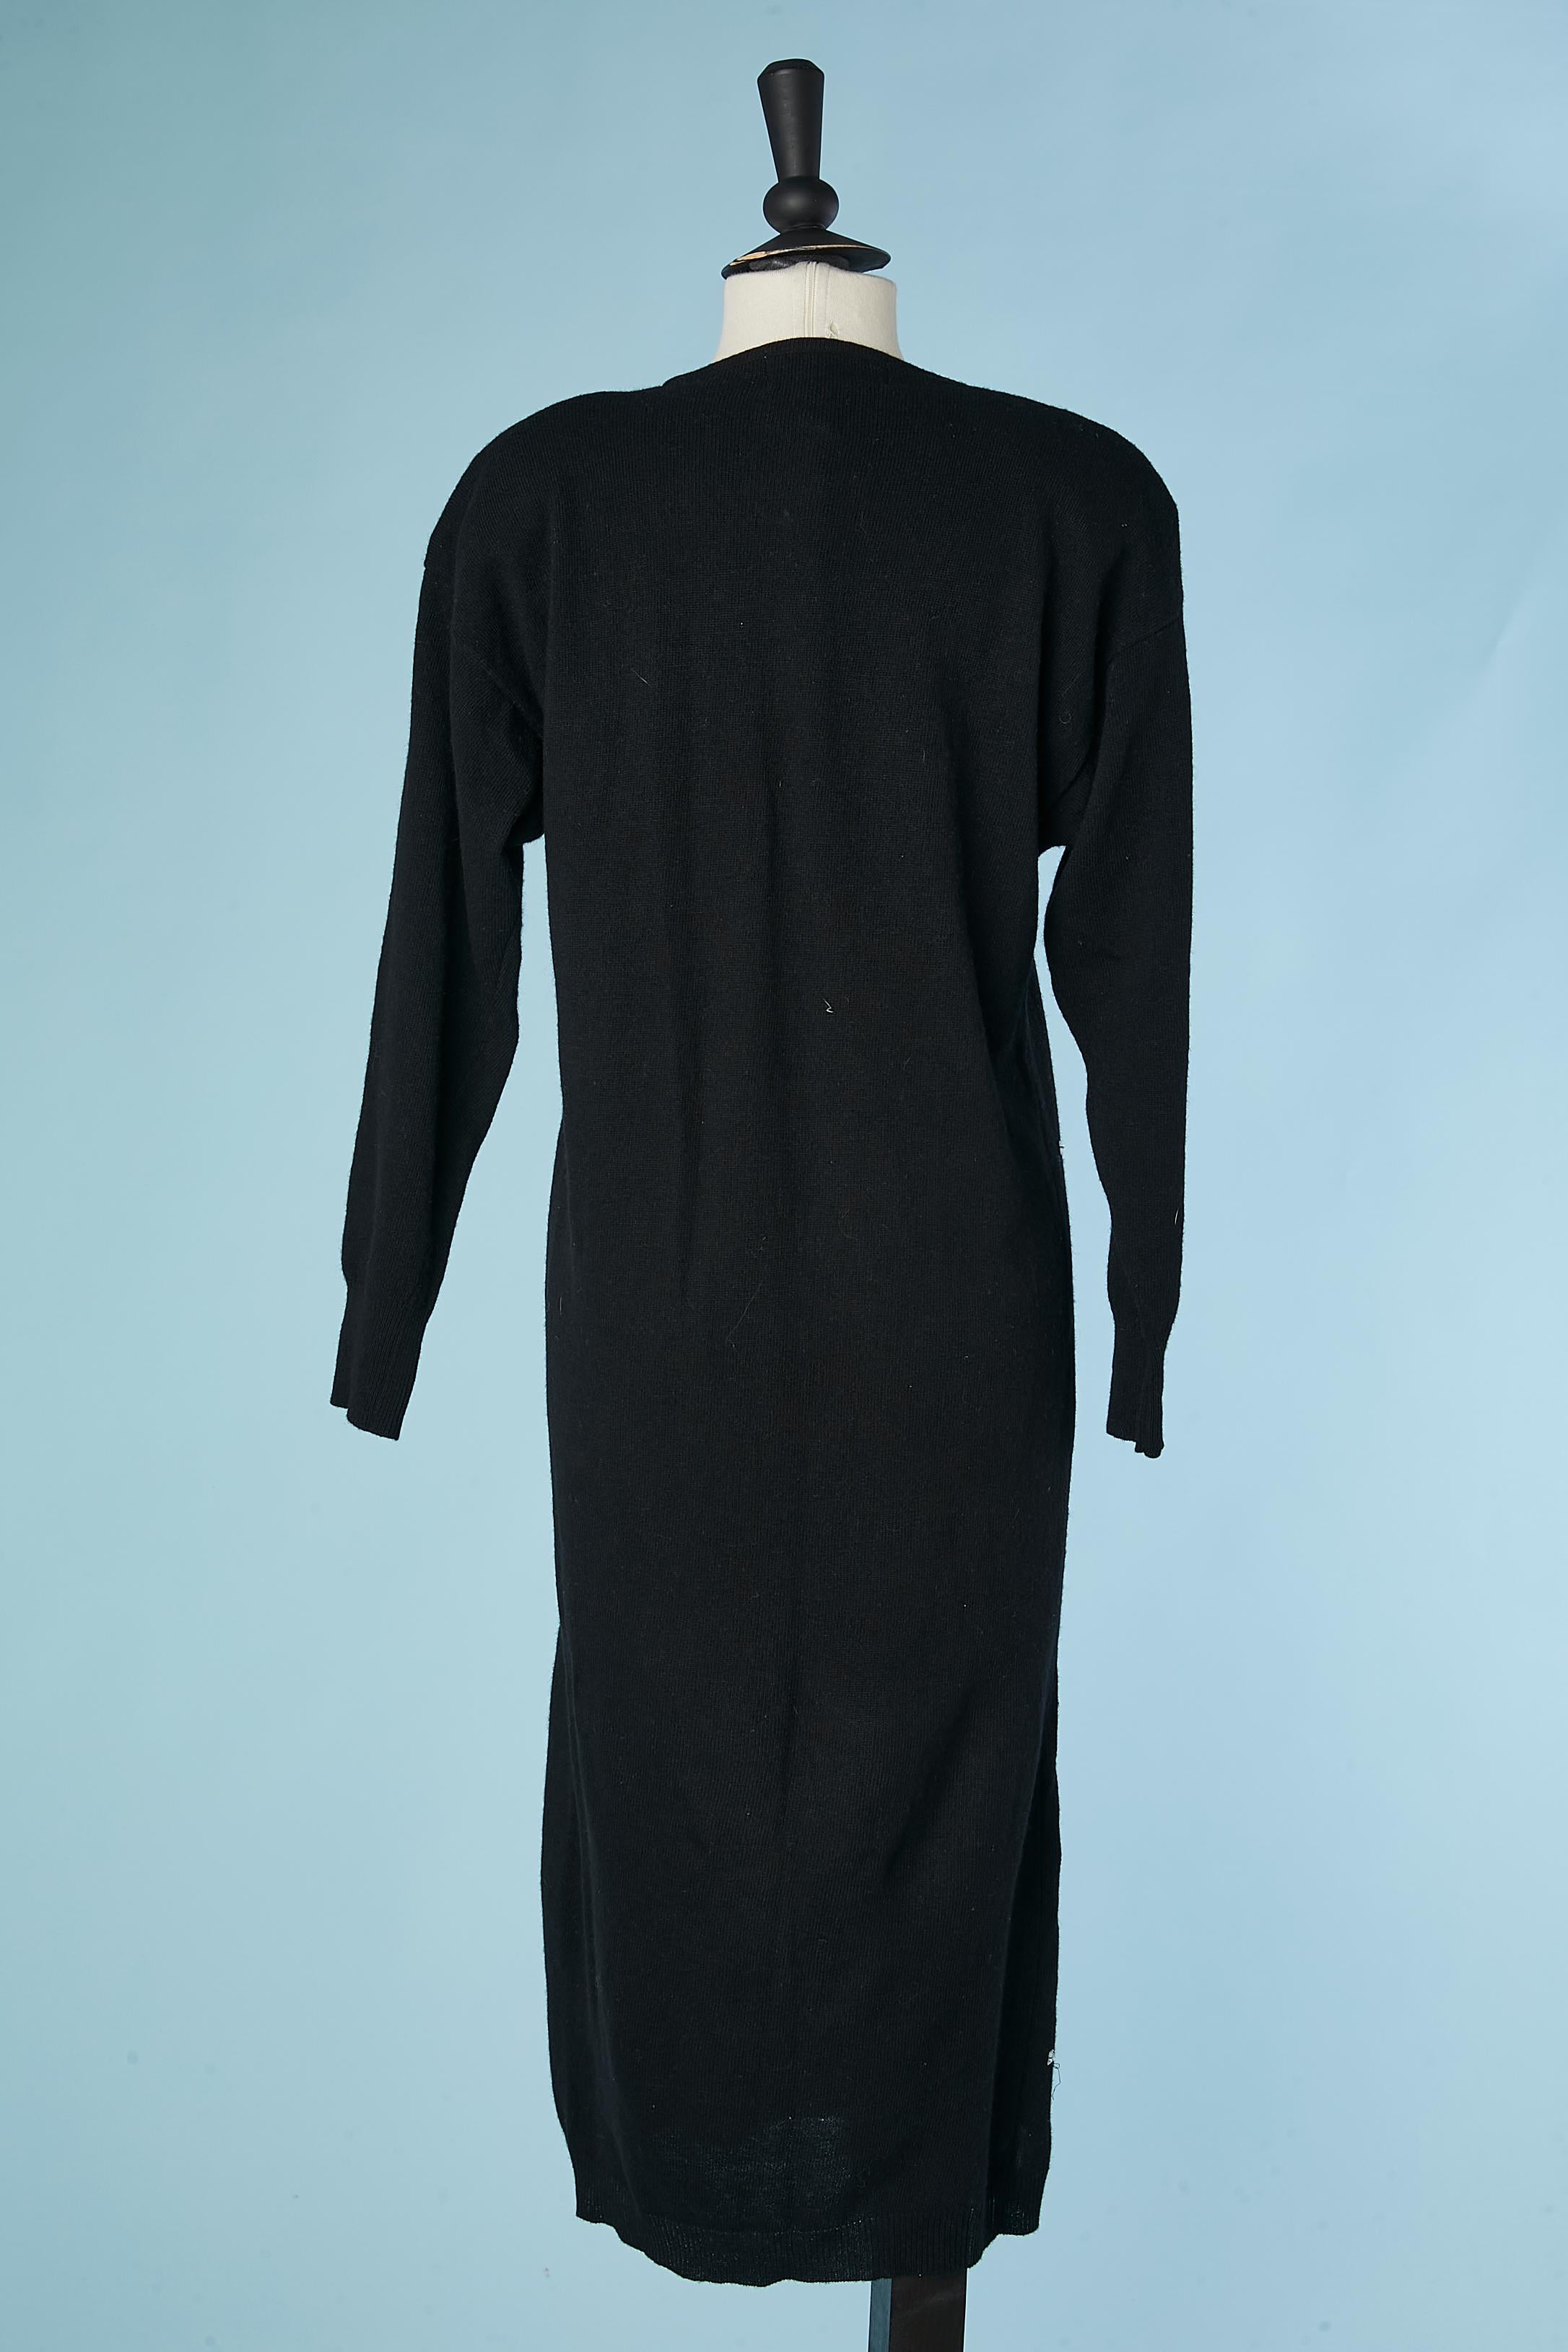 Black wool knit dress with beads embroidery Pierre Cardin Circa 1980's  For Sale 2